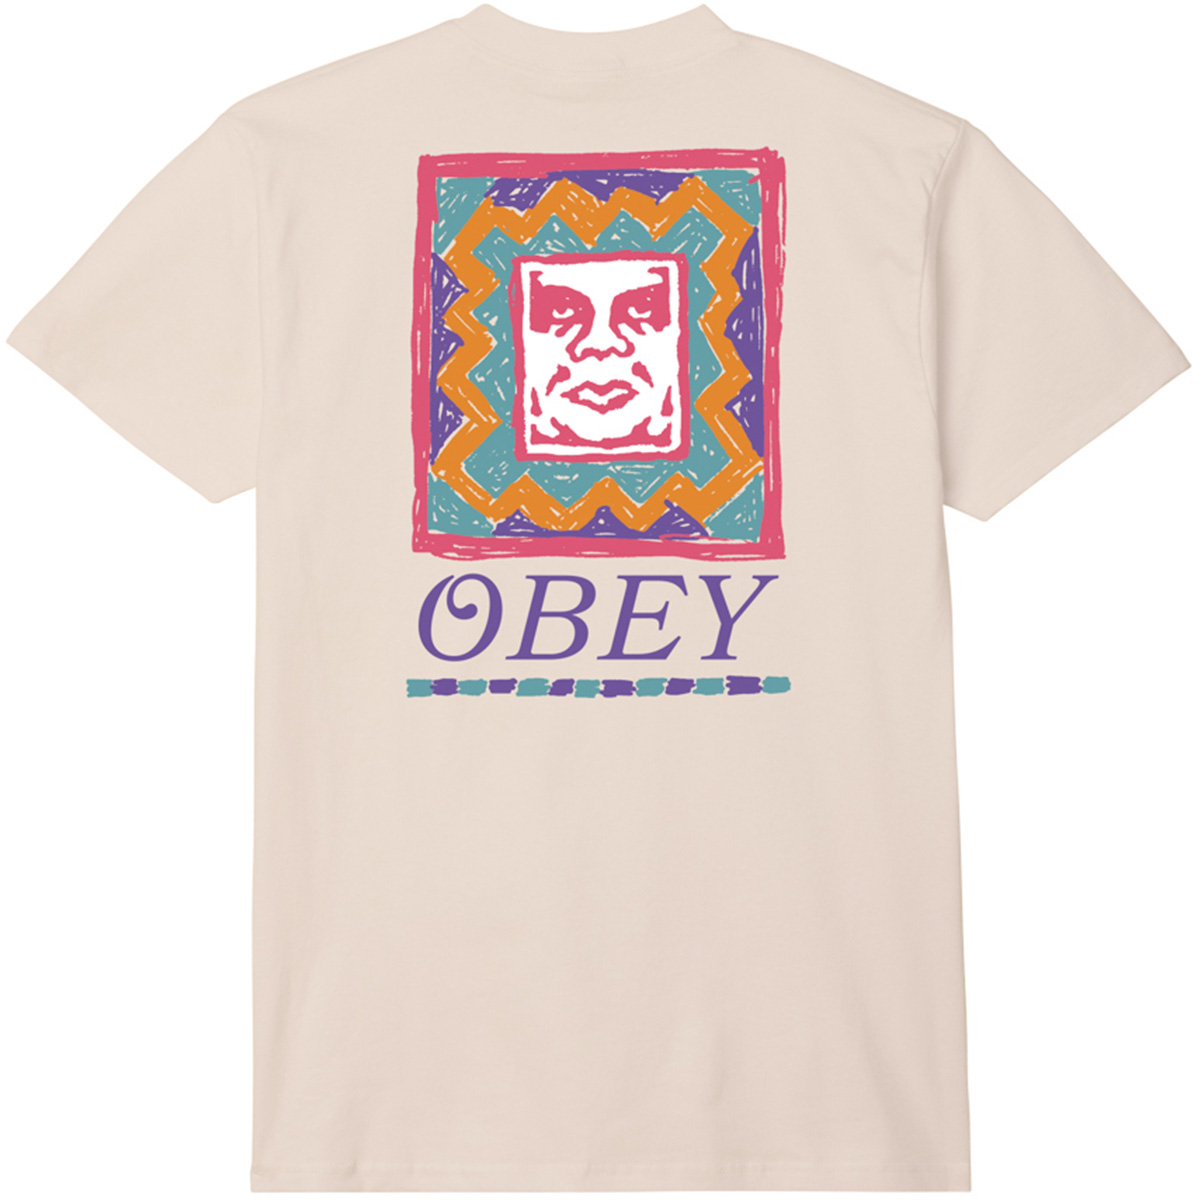 Obey Throwback T-Shirt Cream